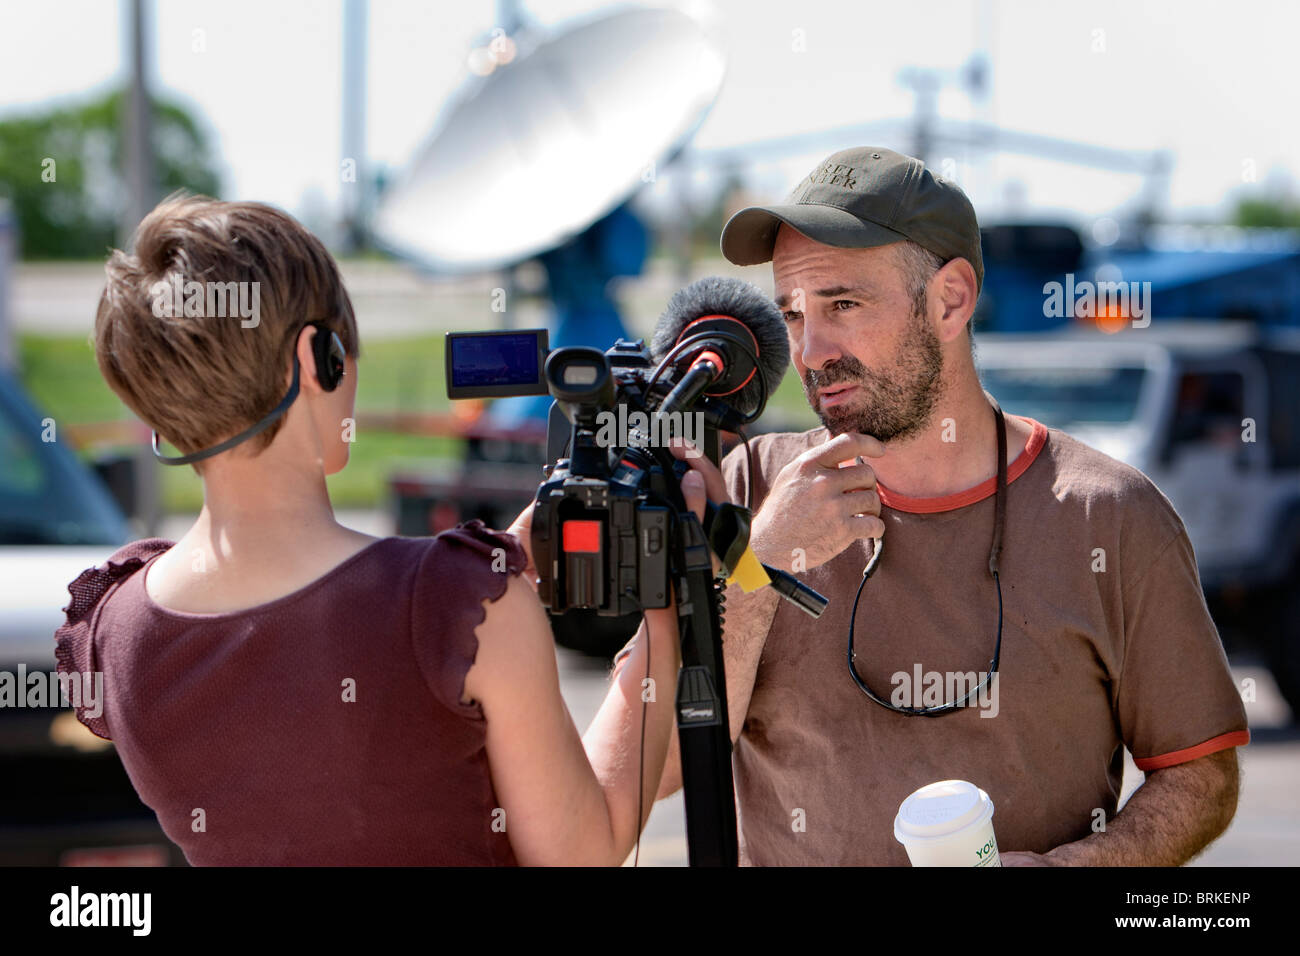 Reality TV show star and IMAX director Sean Casey is interviewed by a Discovery Channel camerawoman for the series 'Storm Chaser Stock Photo